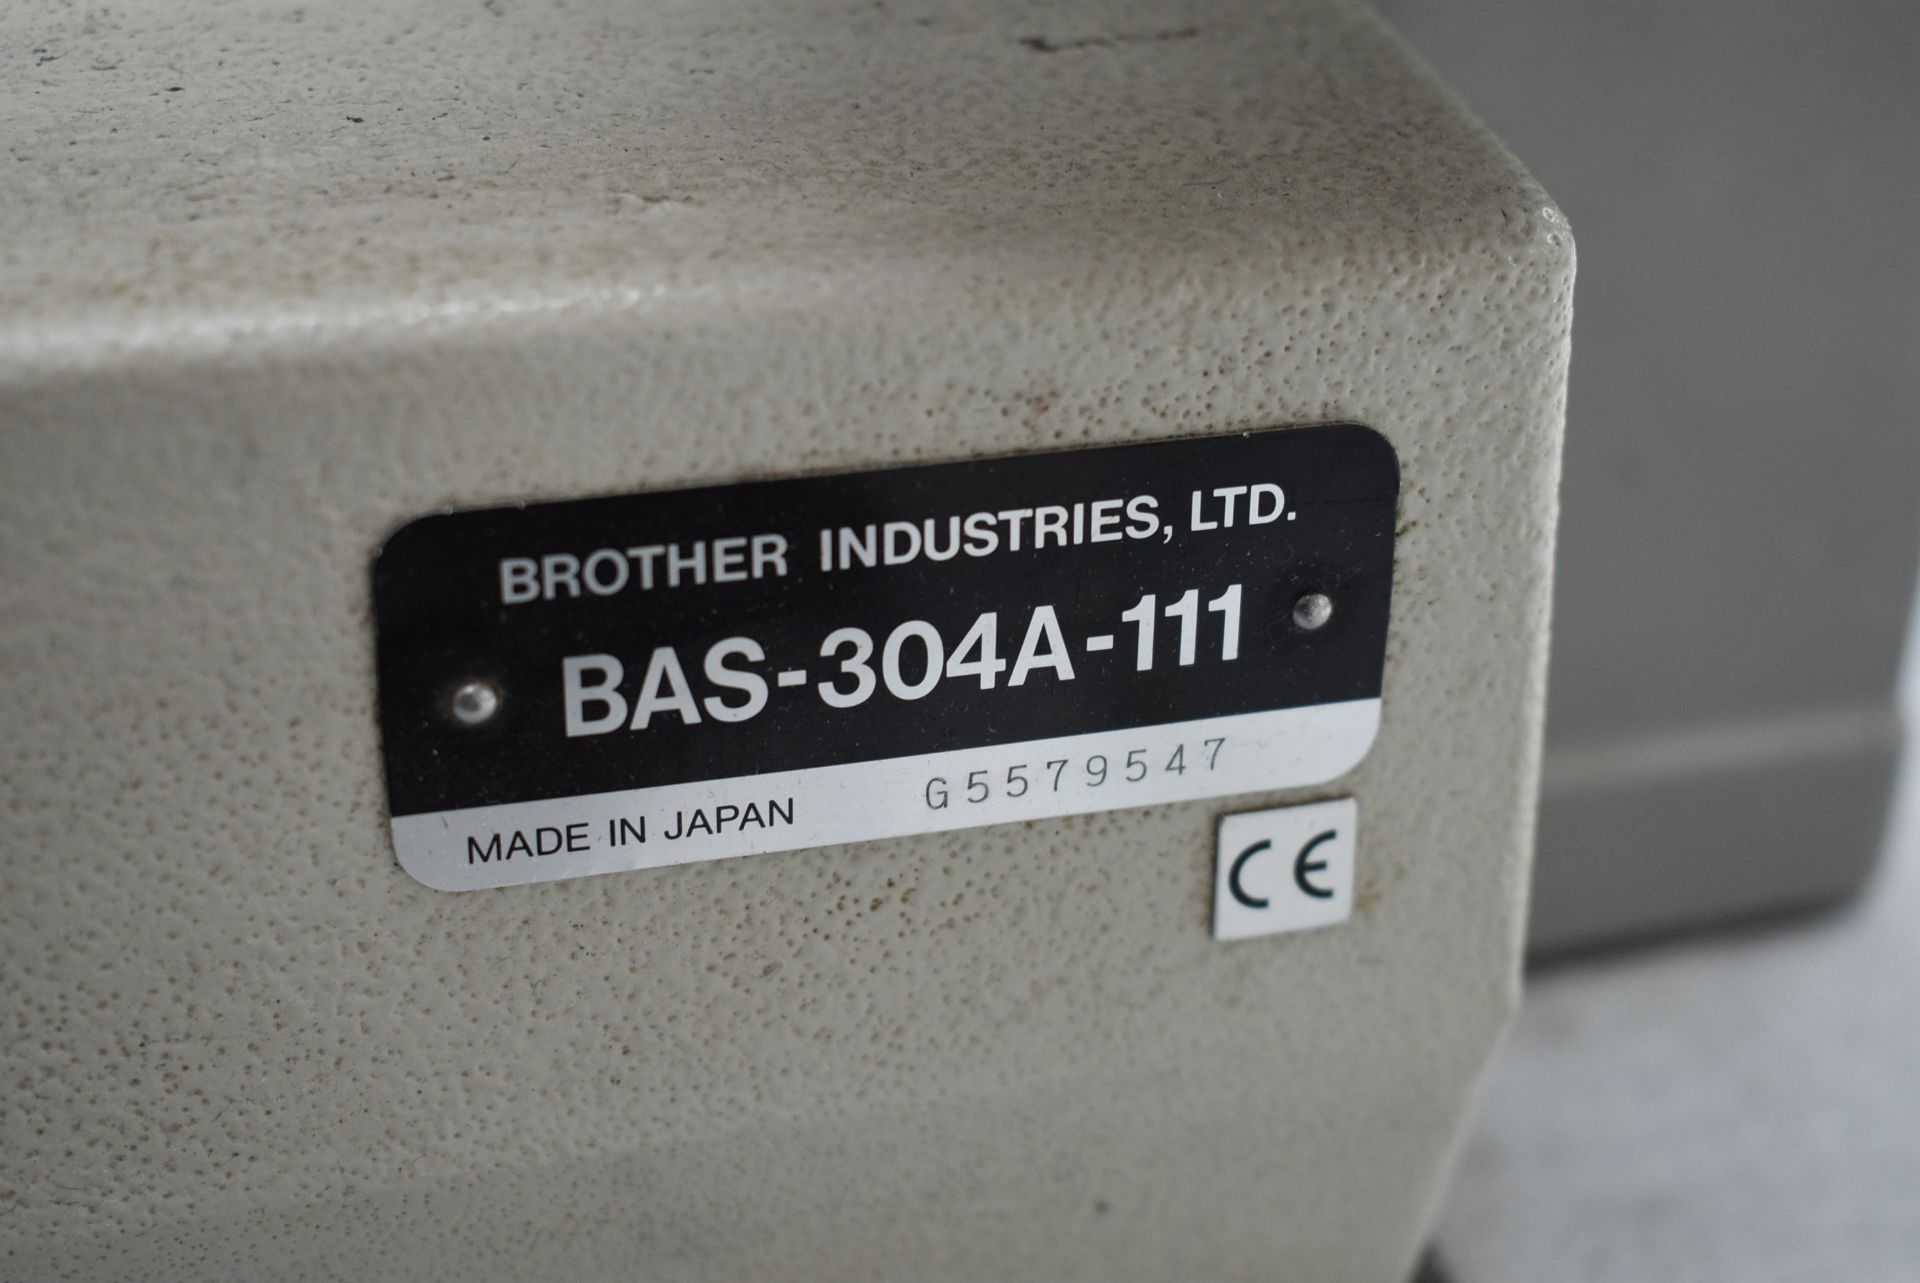 Brother BAS-304A-111 PROGRAMMABLE SEWING MACHINE, serial no. G5579547, with BAS-304A control, 230V - Image 8 of 8